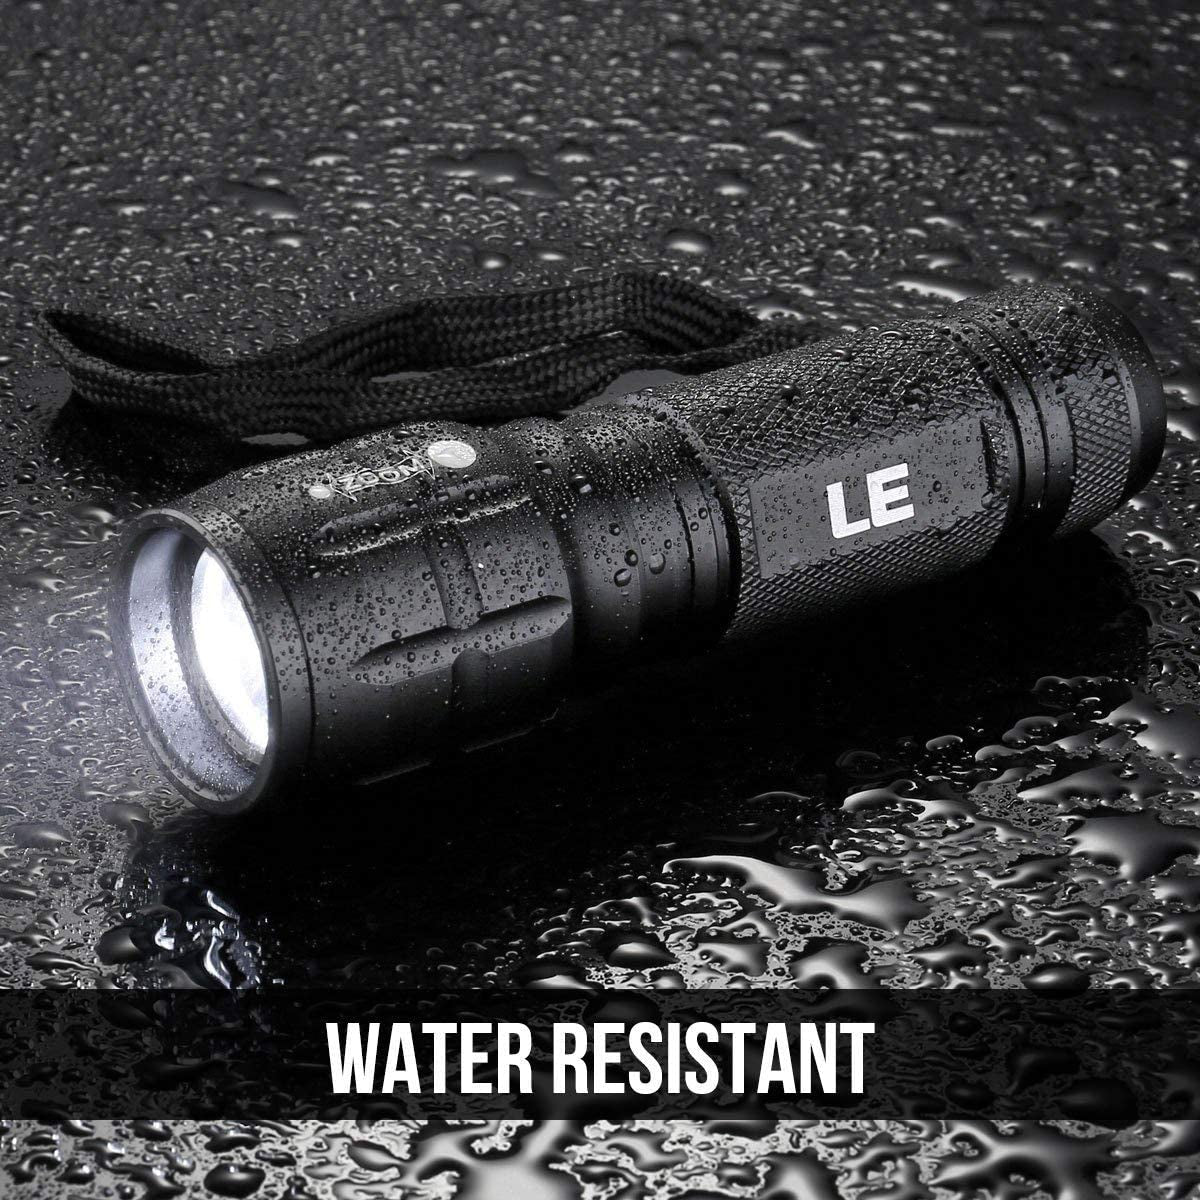 Lighting EVER LED Flashlight - Bright, Portable, and Waterproof